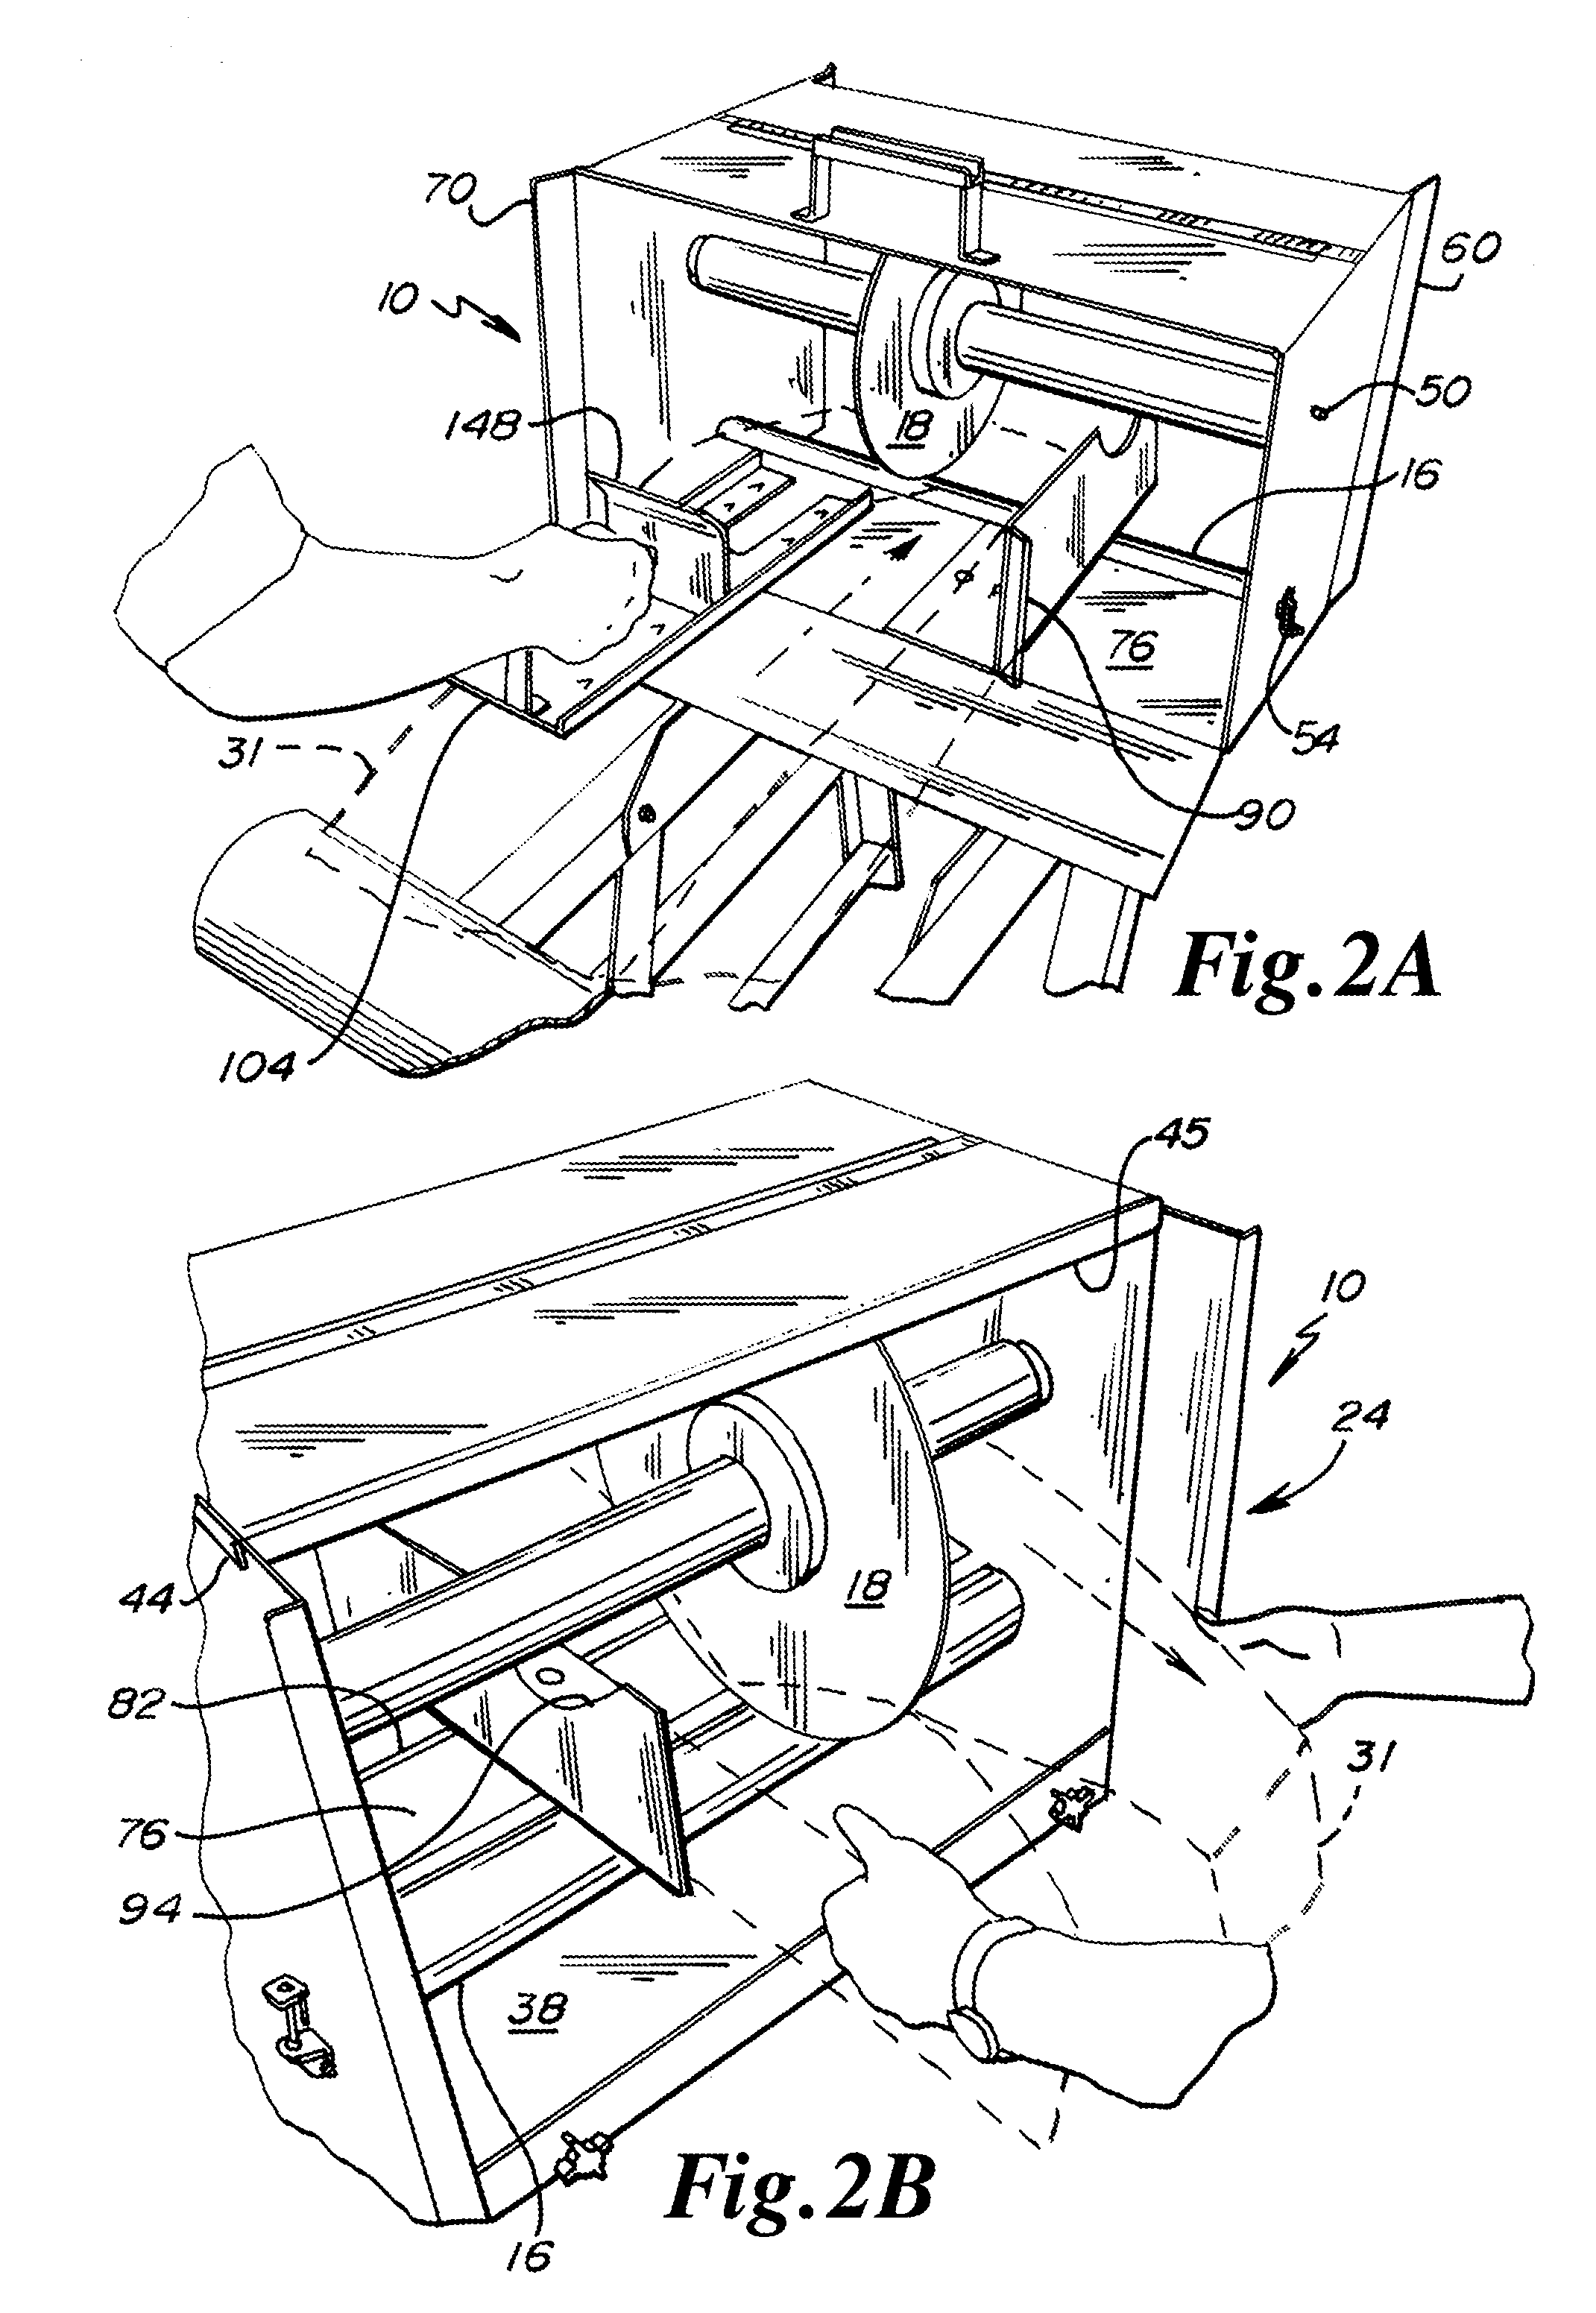 Push/Pull Rotary Cutting Apparatus Driven By Substrate